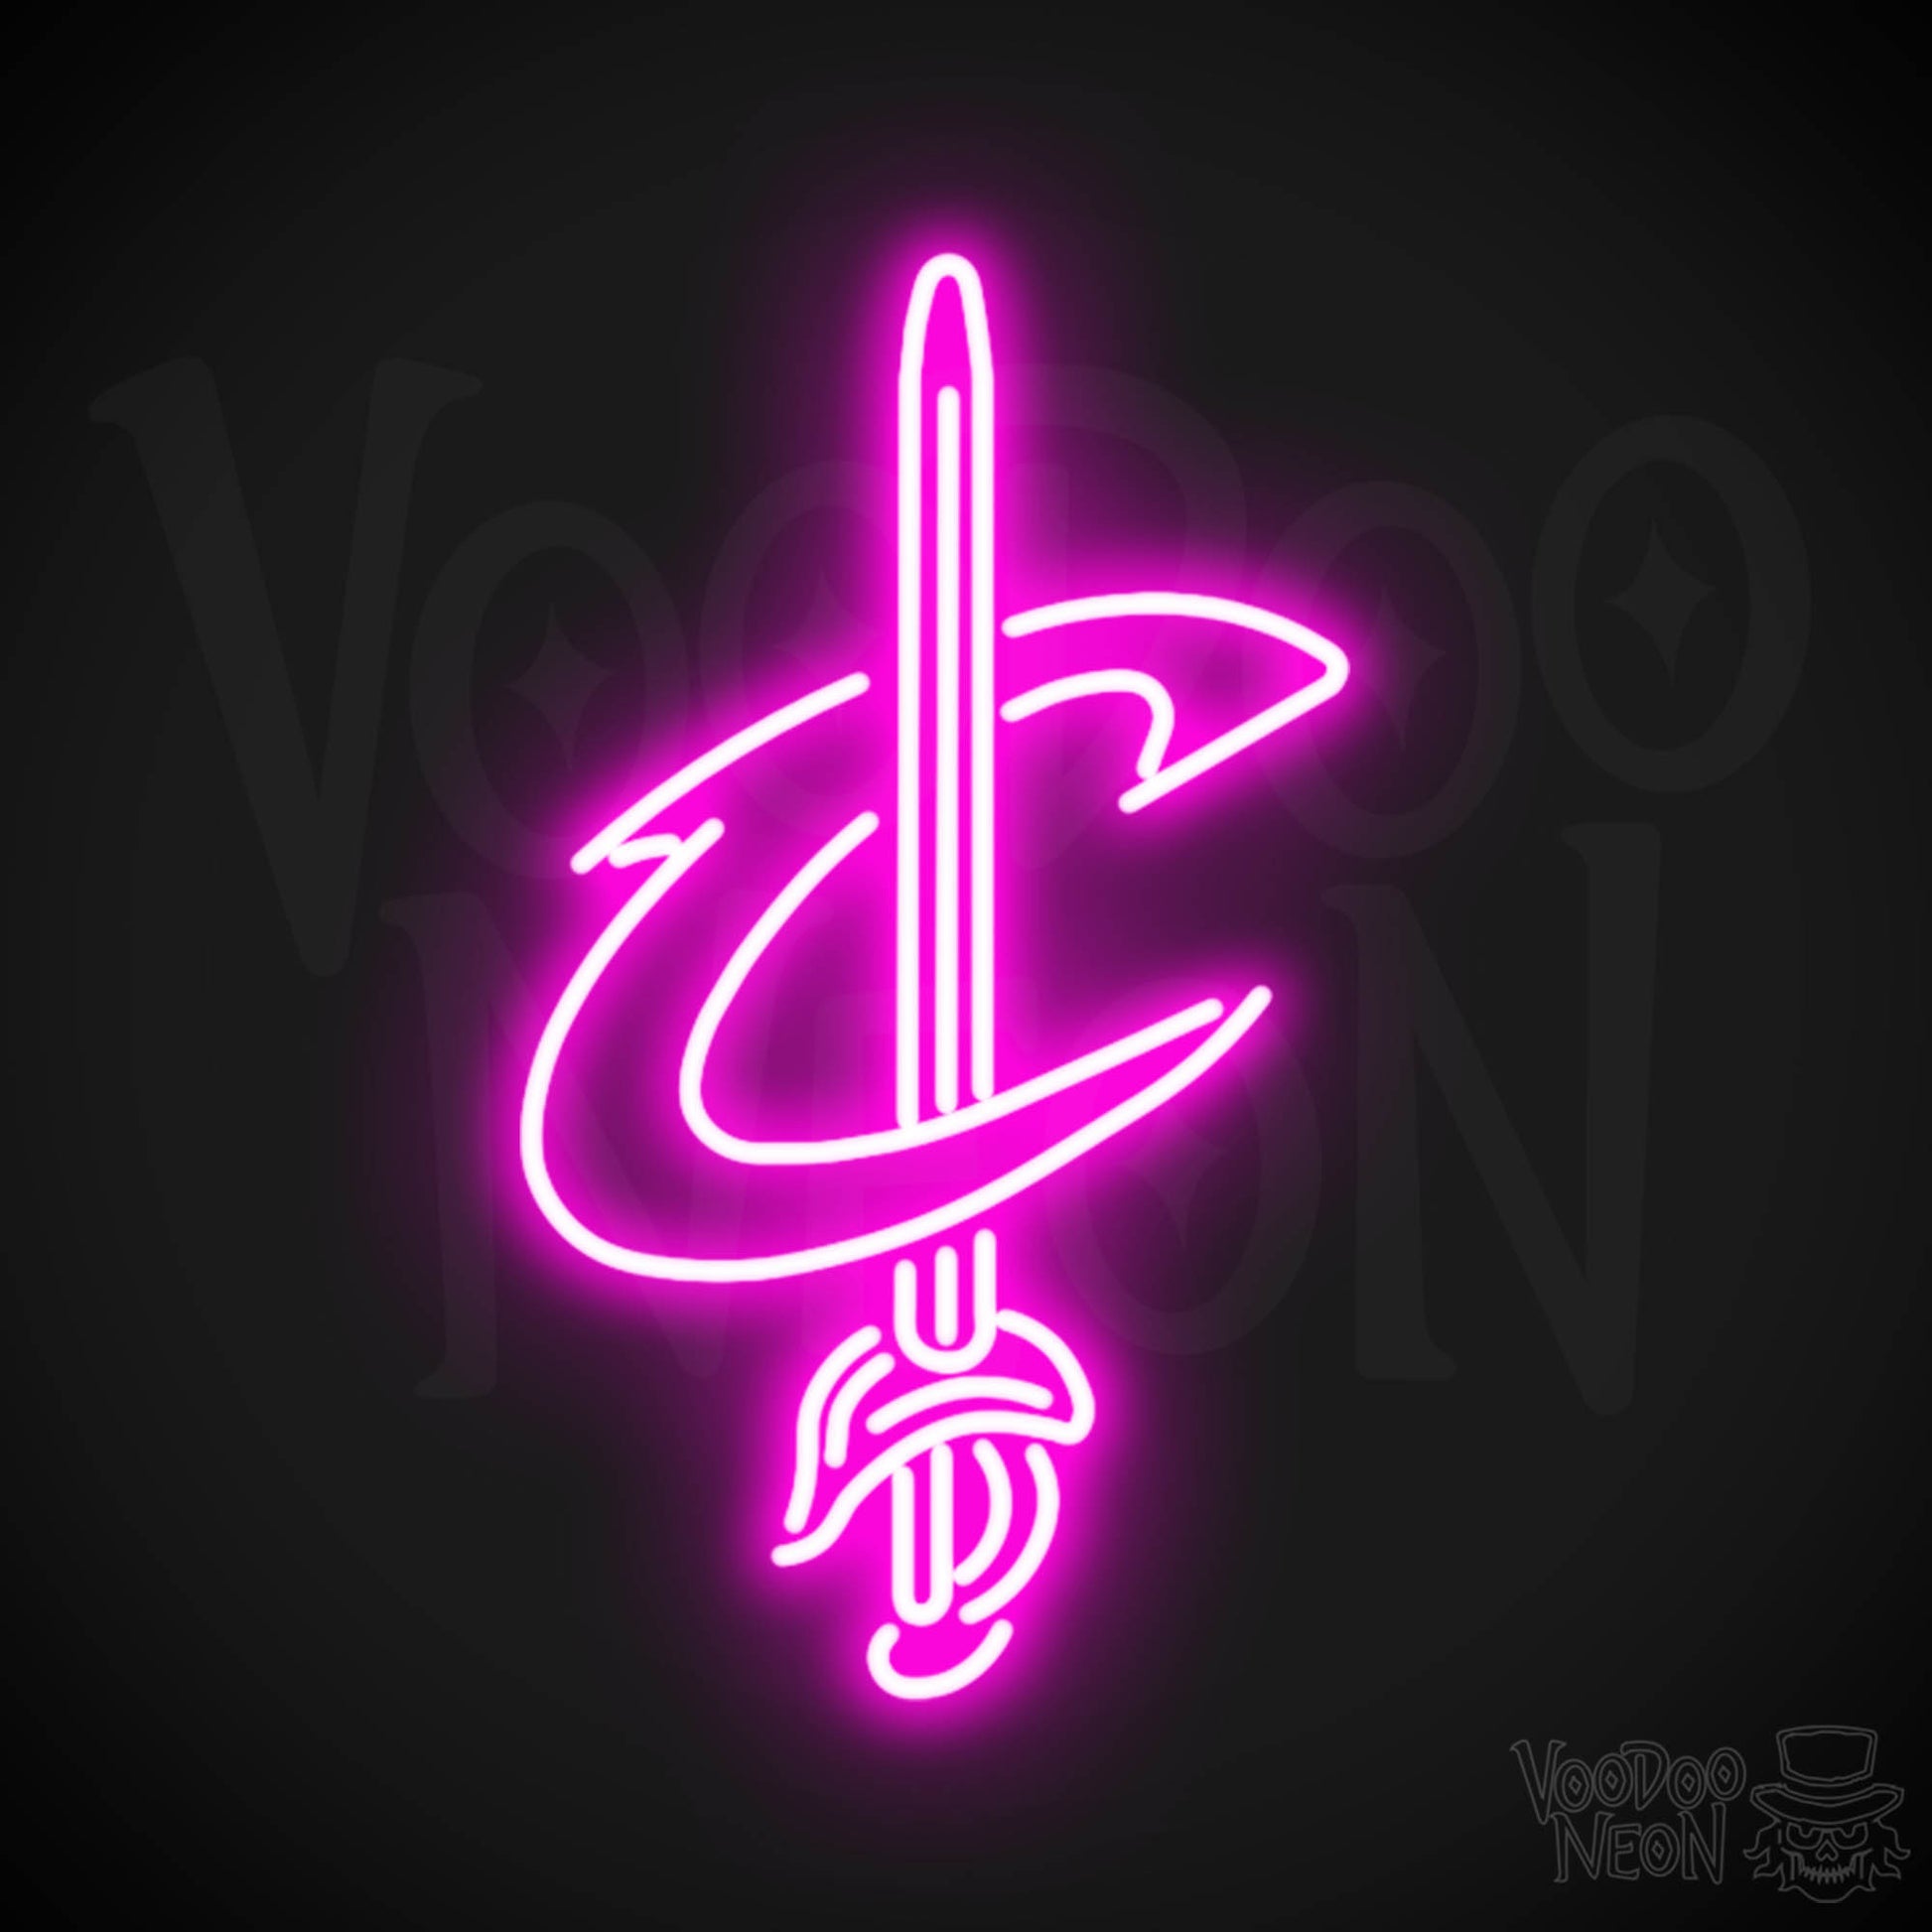 Cleveland Cavaliers Neon Sign - Cleveland Cavaliers Sign - Neon Cavaliers Wall Art - Color Pink